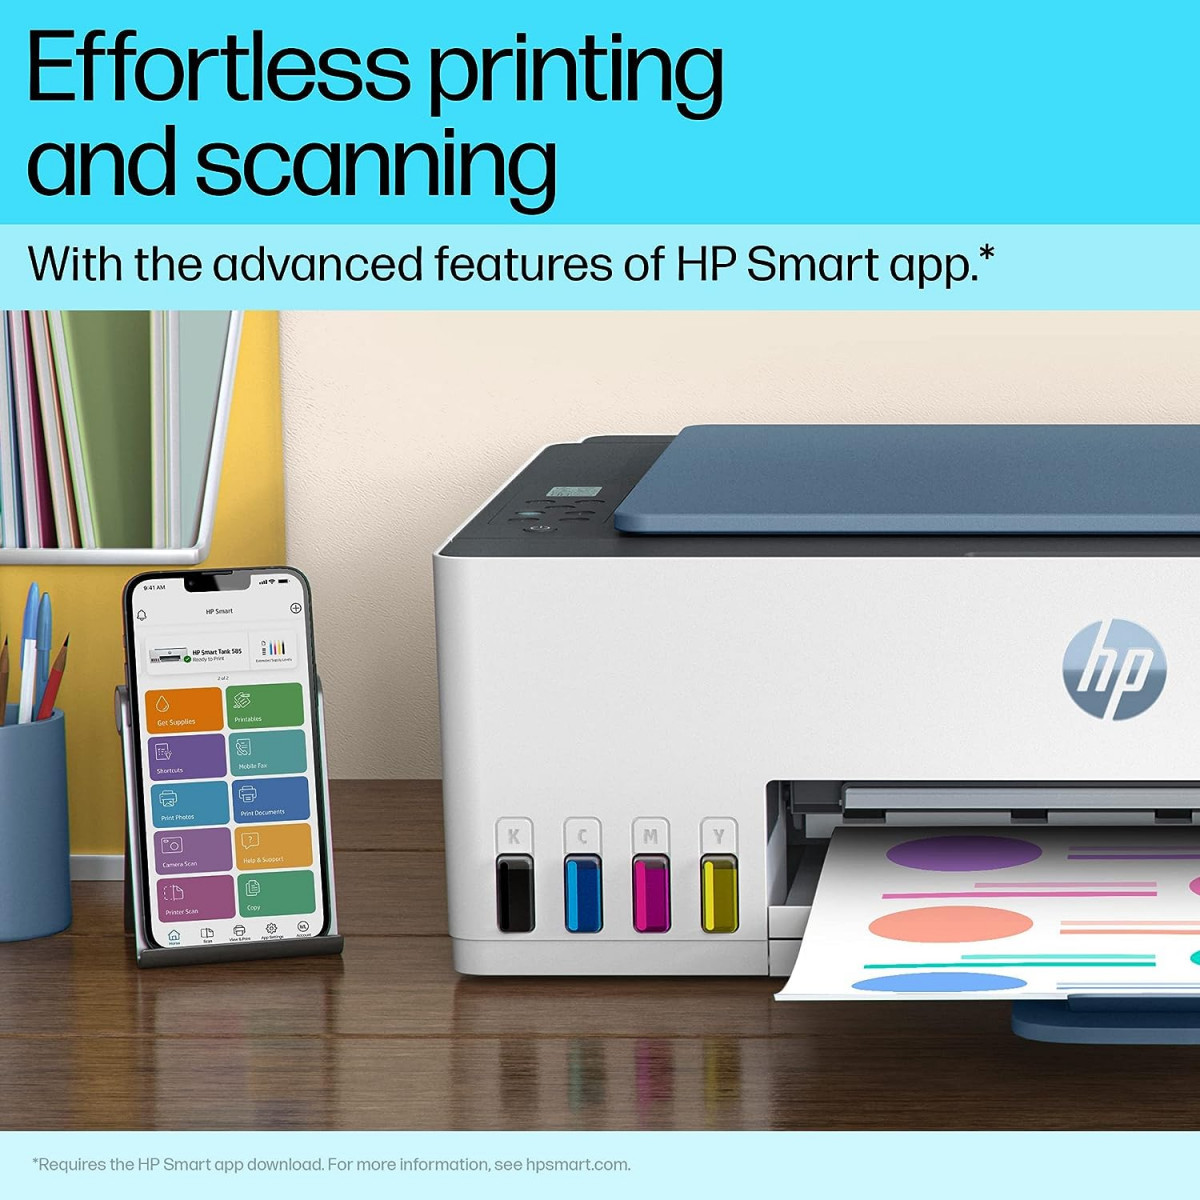 HP Smart Tank 585 All-in-one WiFi Colour Printer (Upto 6000 Black and 6000 Colour Pages Included in The Box)